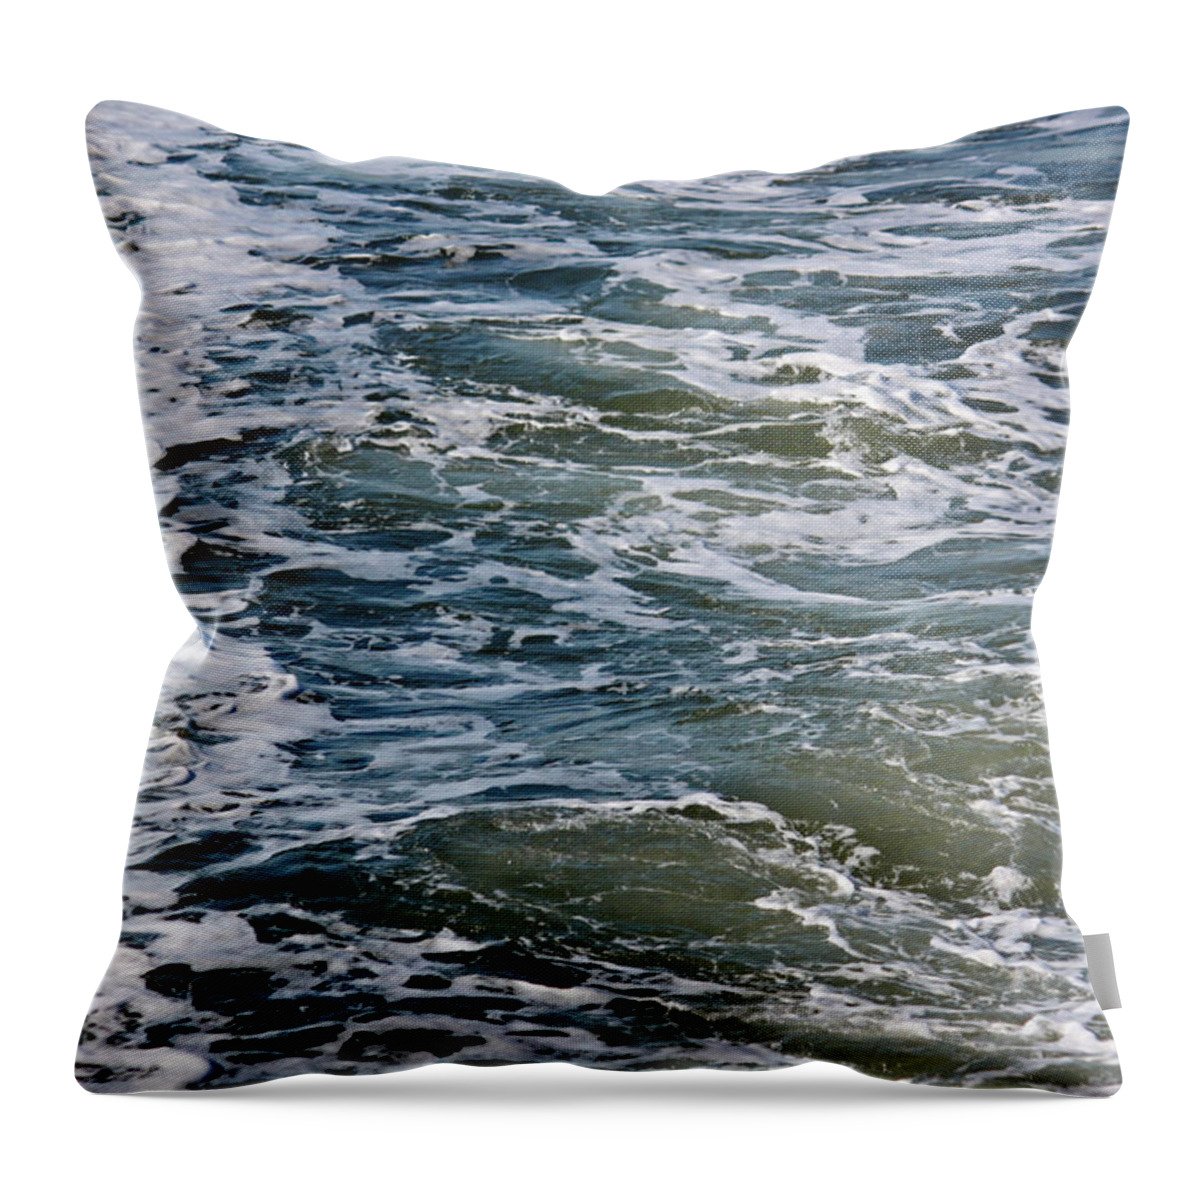 Water Throw Pillow featuring the photograph Wake by Suzanne Gaff